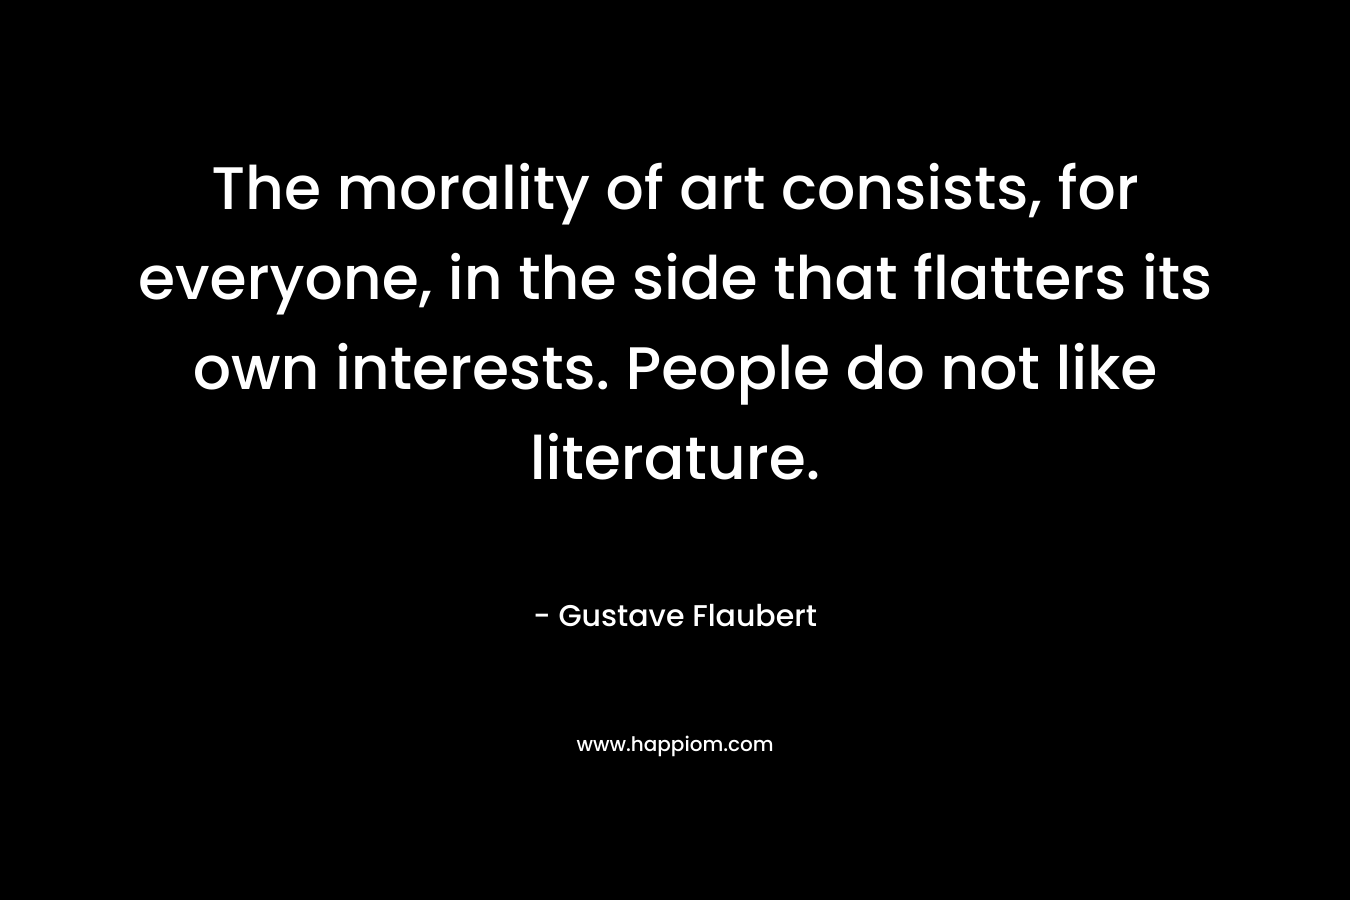 The morality of art consists, for everyone, in the side that flatters its own interests. People do not like literature. – Gustave Flaubert